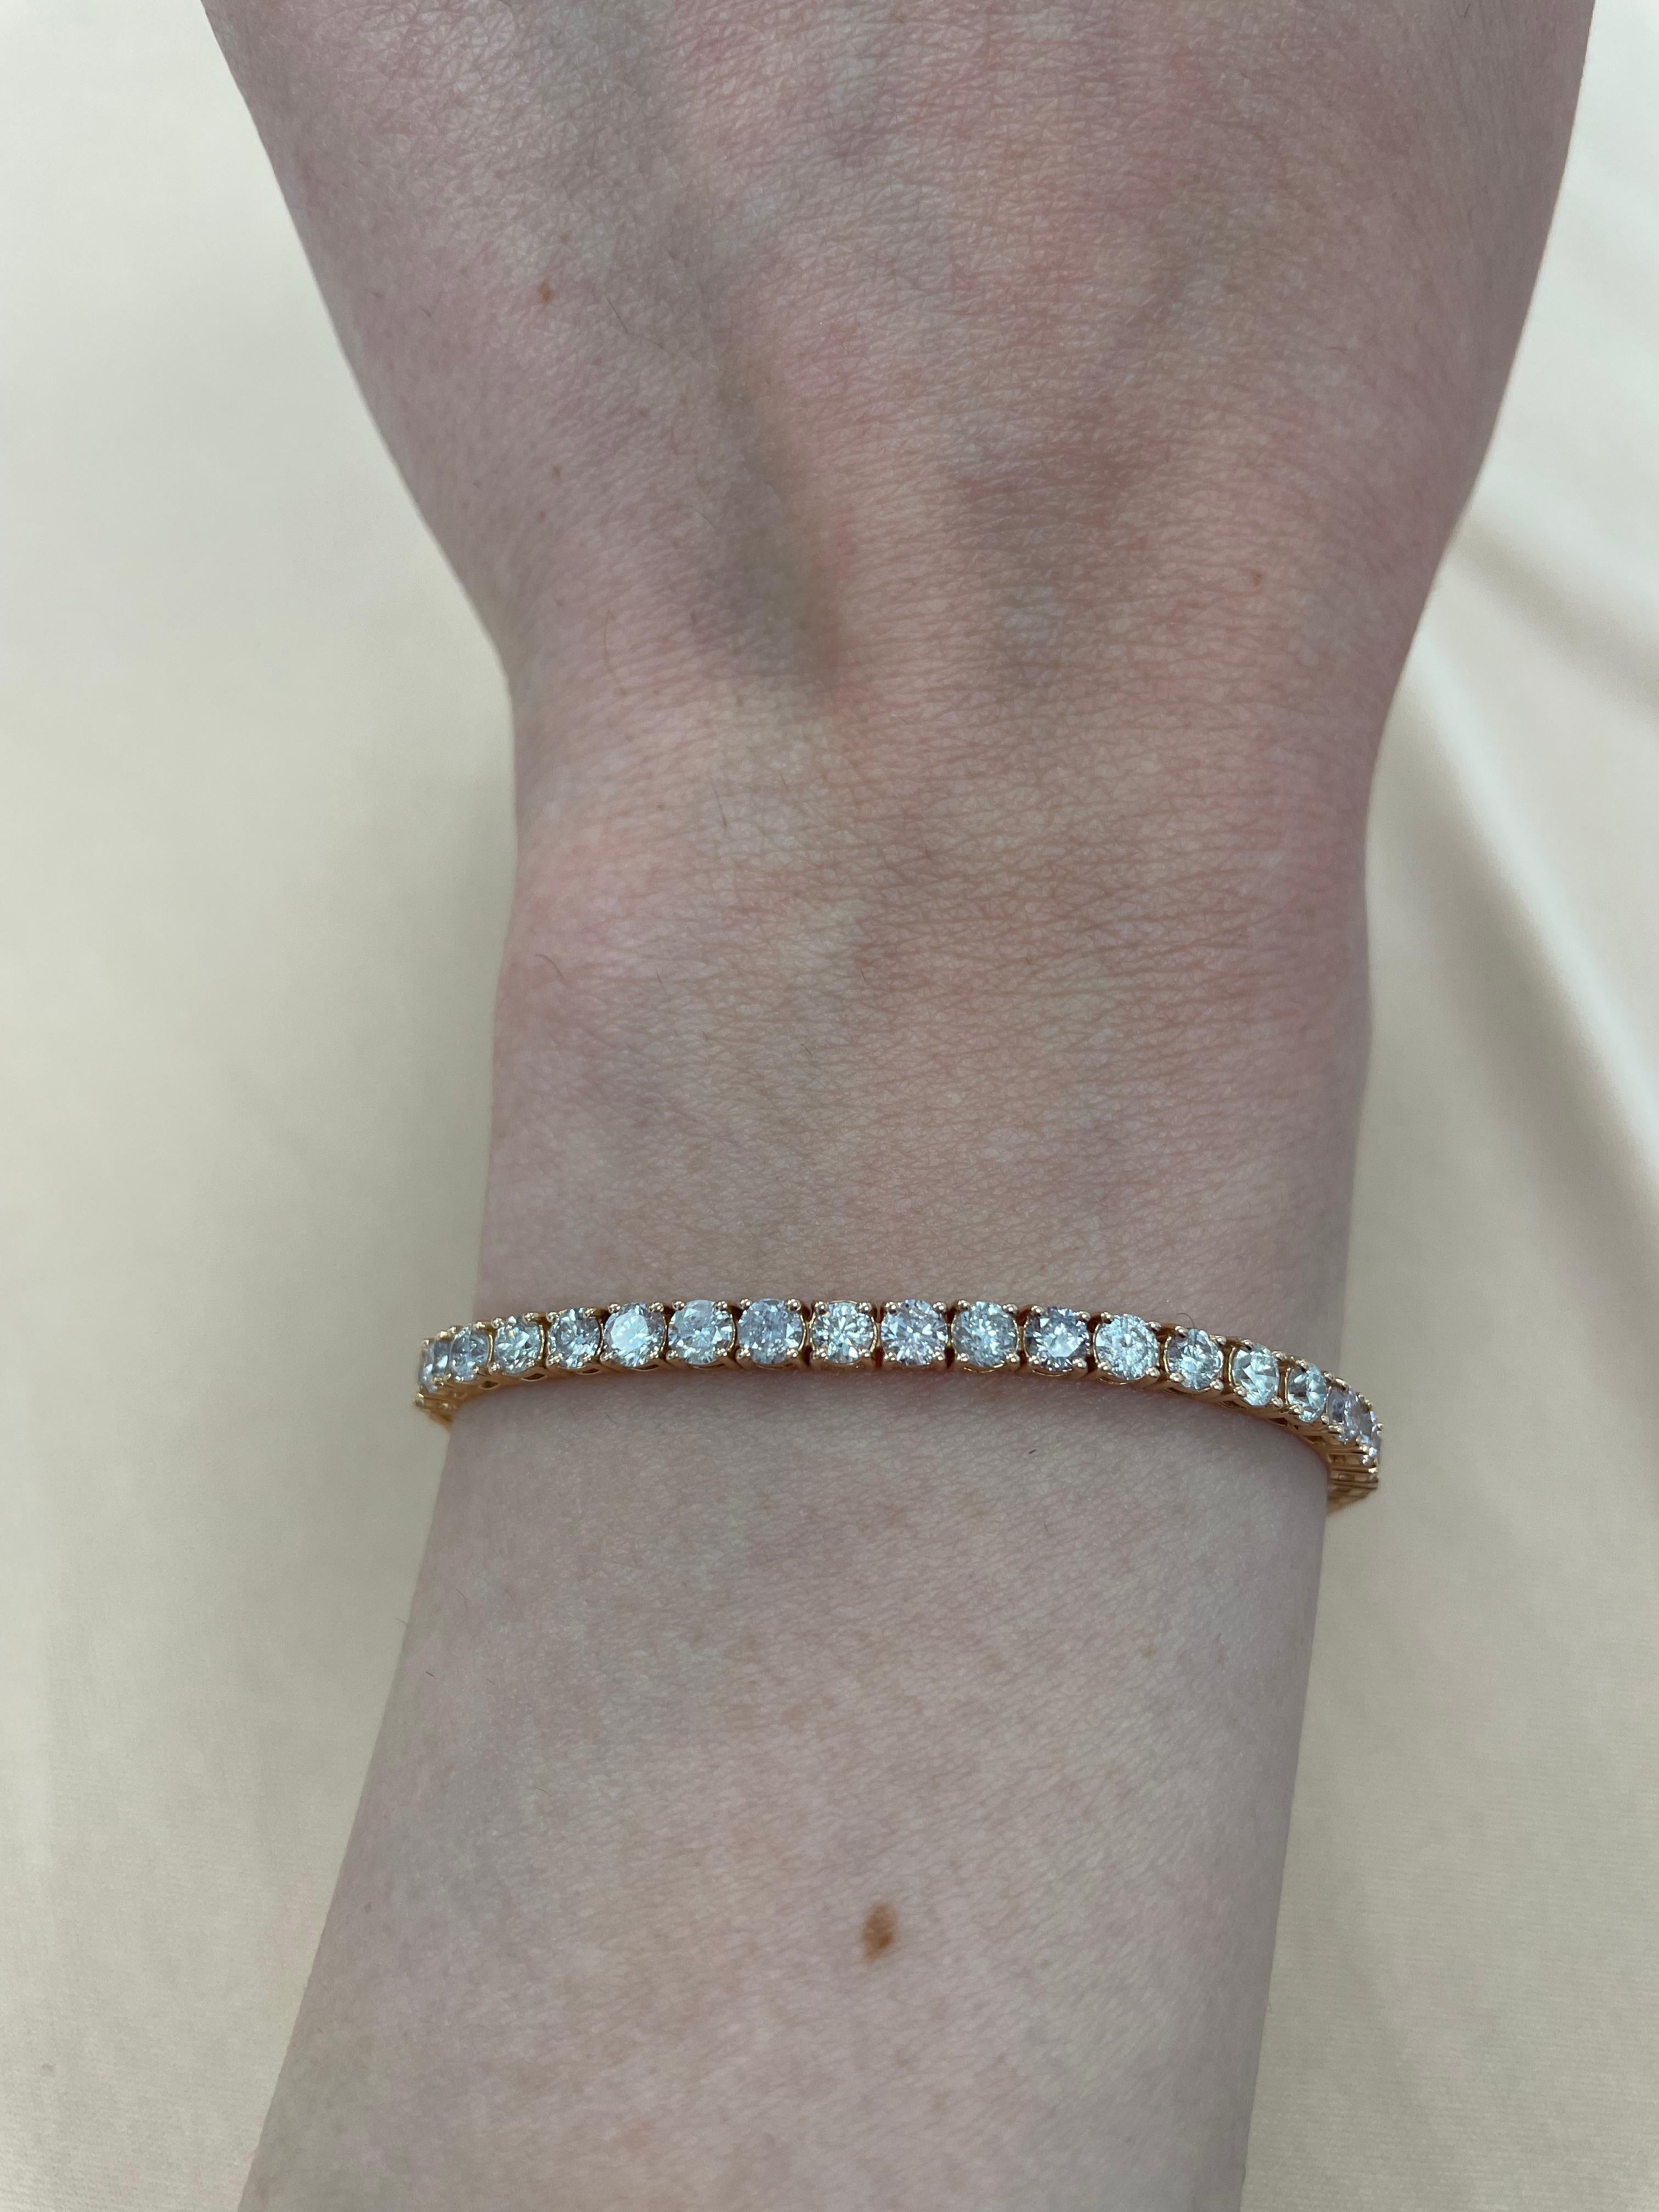 Exquisite and timeless diamonds tennis bracelet, by Alexander Beverly Hills.
53 round brilliant diamonds, 5.55 carats total. Approximately Very Light Pink color (looks like regular white diamonds in mounting) and SI clarity. Four prong set in 14k